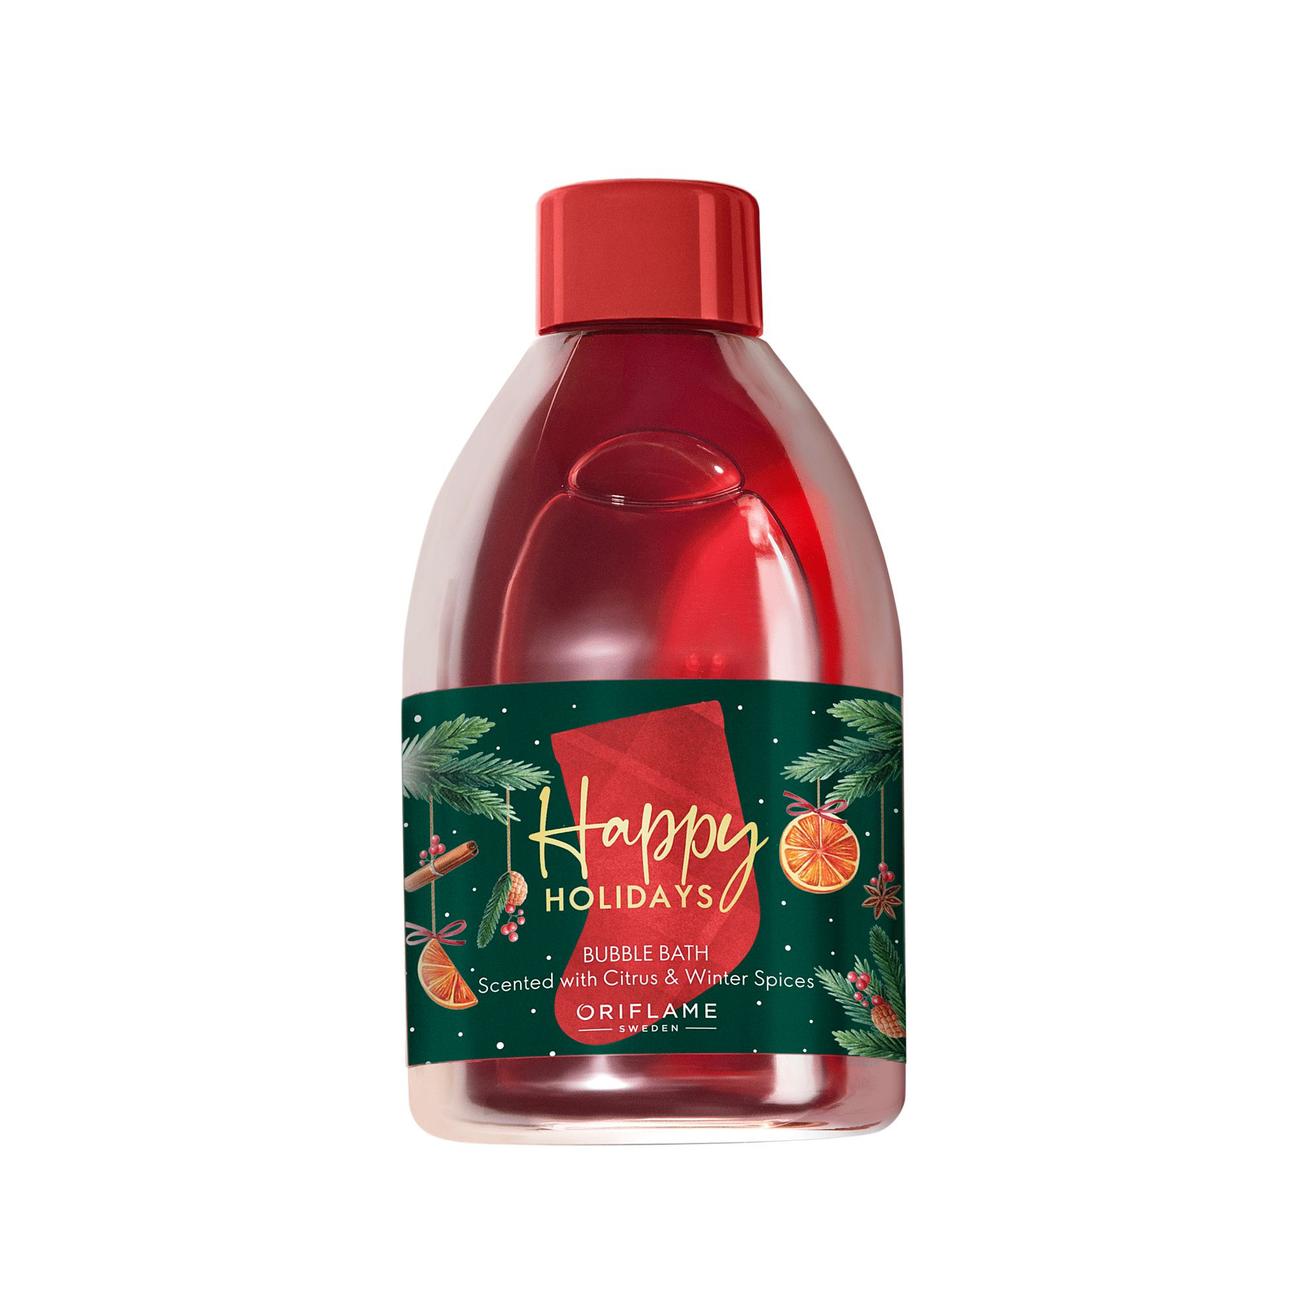 Tilbud: Happy Holidays Bubble Bath Scented with Citrus & Winter Spices kr 139 på Oriflame